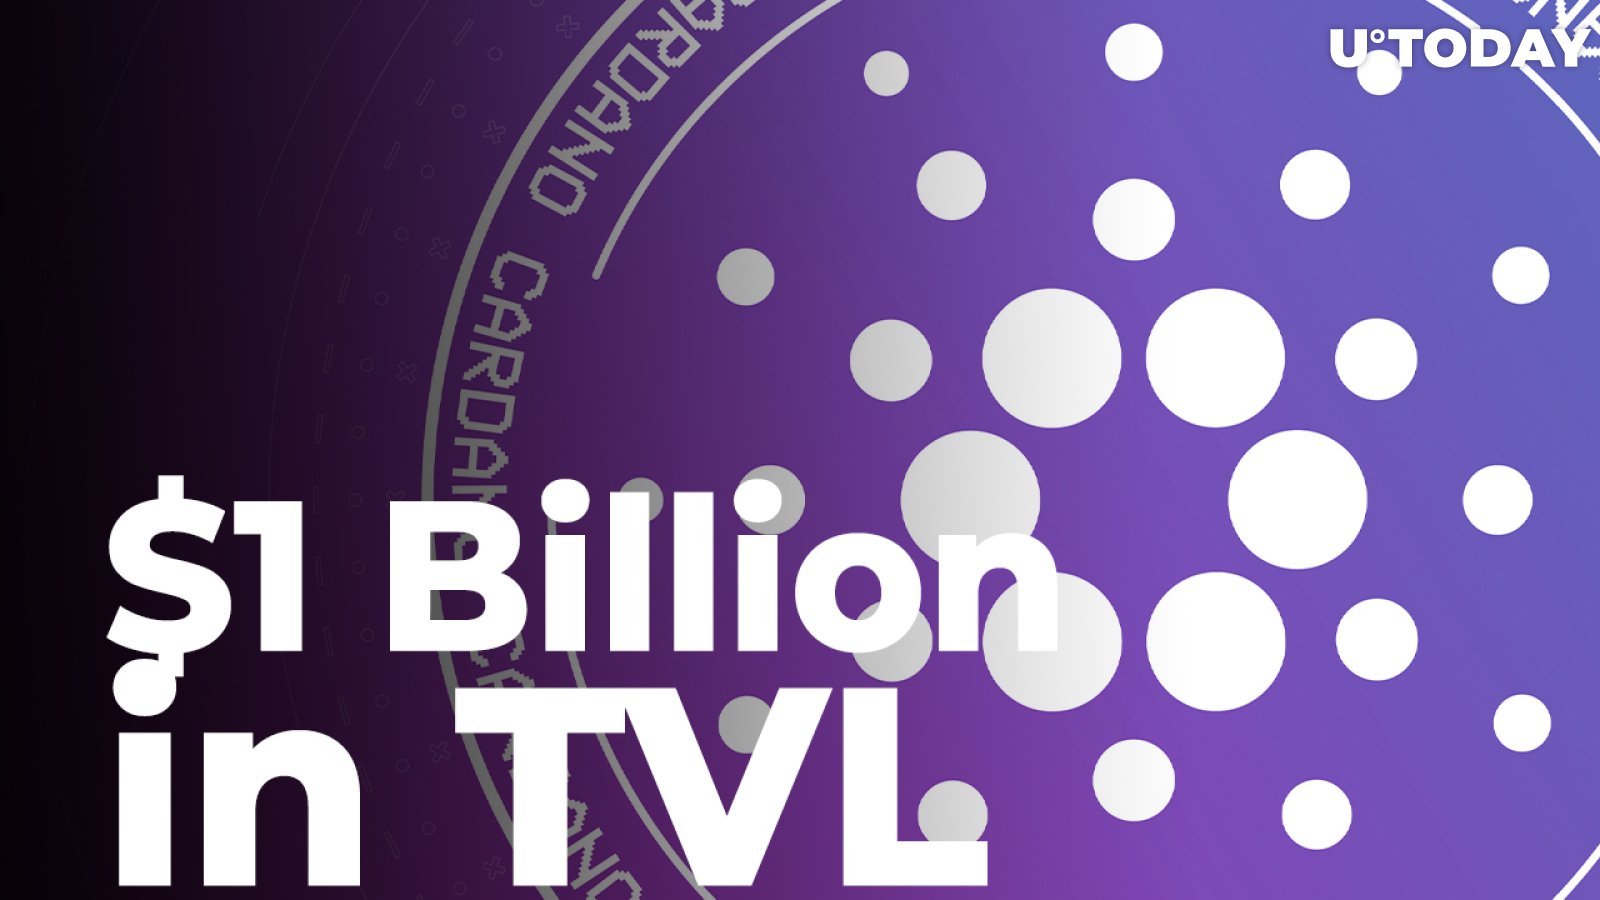 Cardano Might Reach $1 Billion in TVL at Year-End as Metric Grows: Details